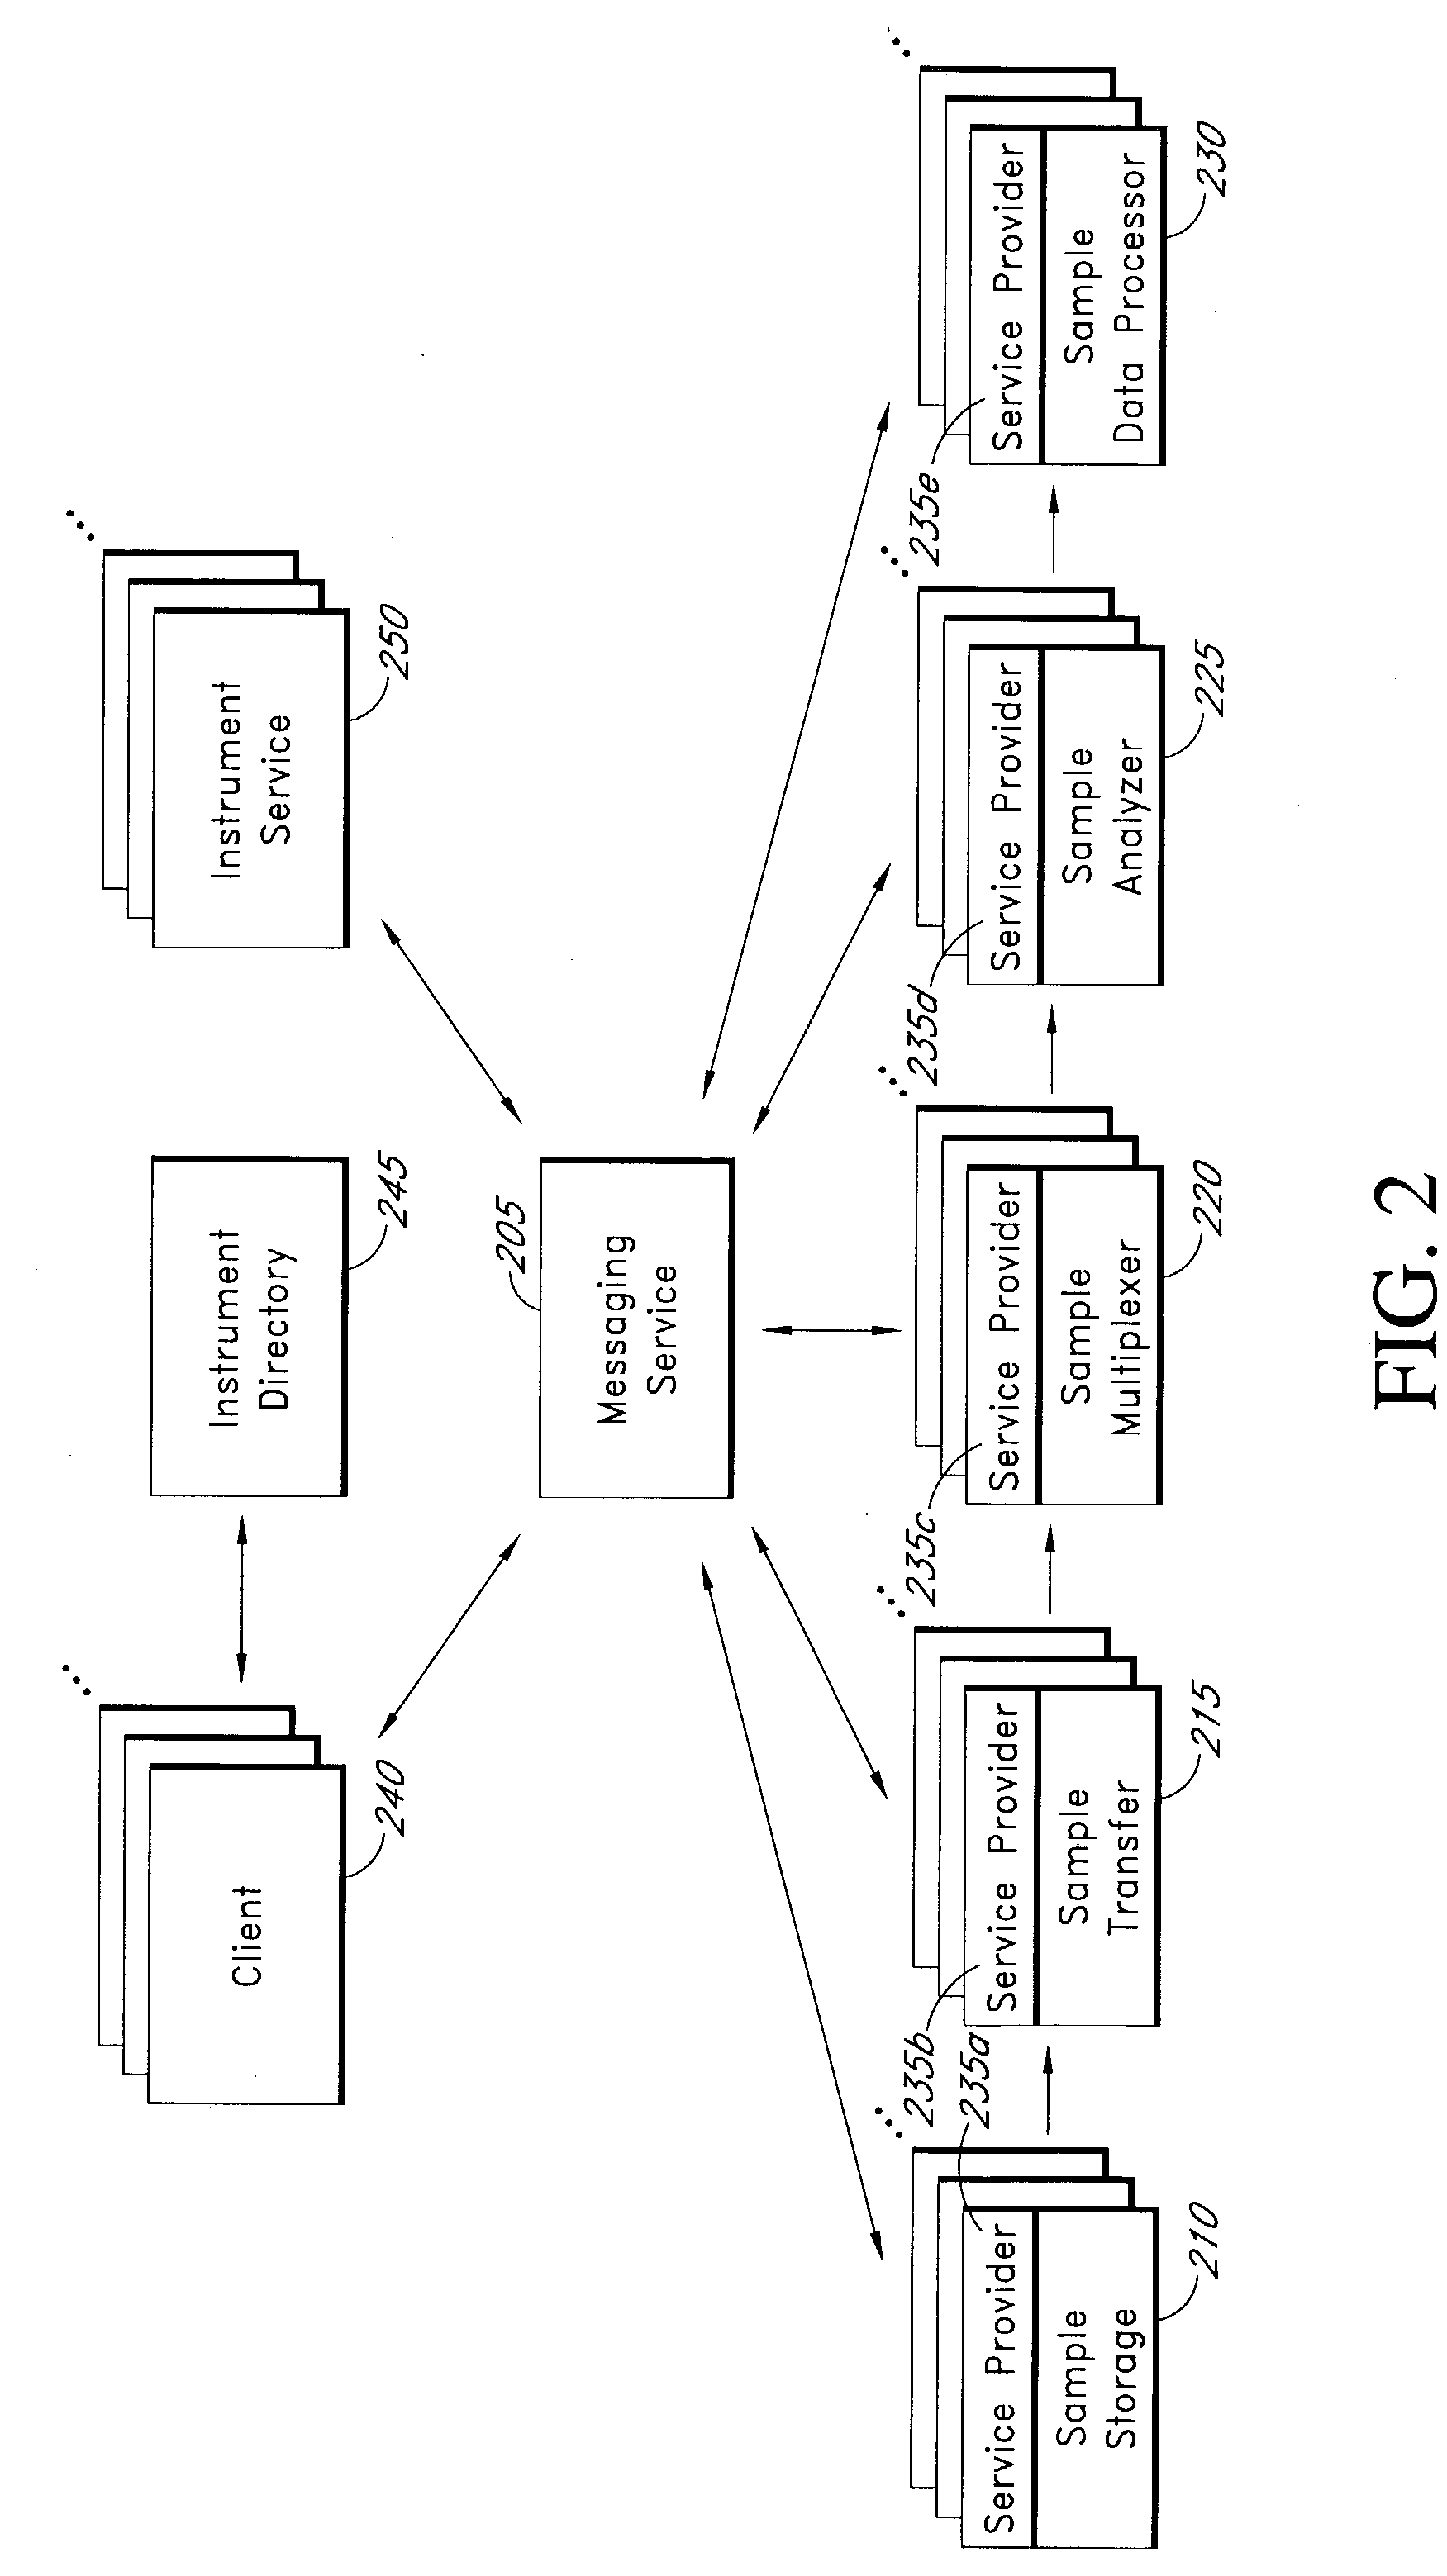 System and method for open control and monitoring of biological instruments